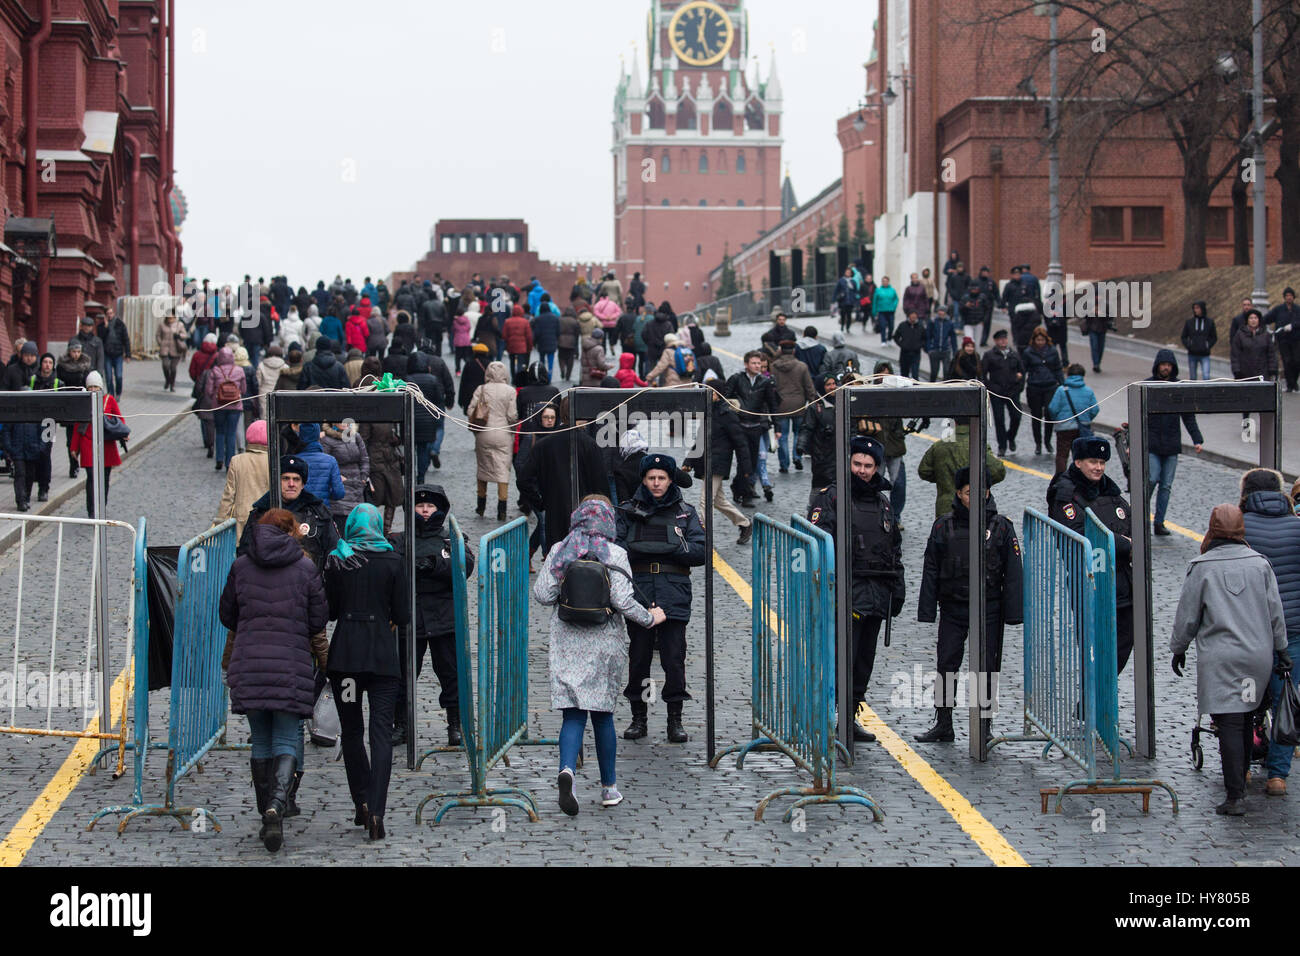 Moscow, Russia. 2nd Apr, 2017. Policemen stand guard at an entrance of the Red Square in Moscow, Russia, on April 2, 2017. Police detained more than 20 participants at unsanctioned rallies in center of Moscow on Sunday. Credit: Bai Xueqi/Xinhua/Alamy Live News Stock Photo